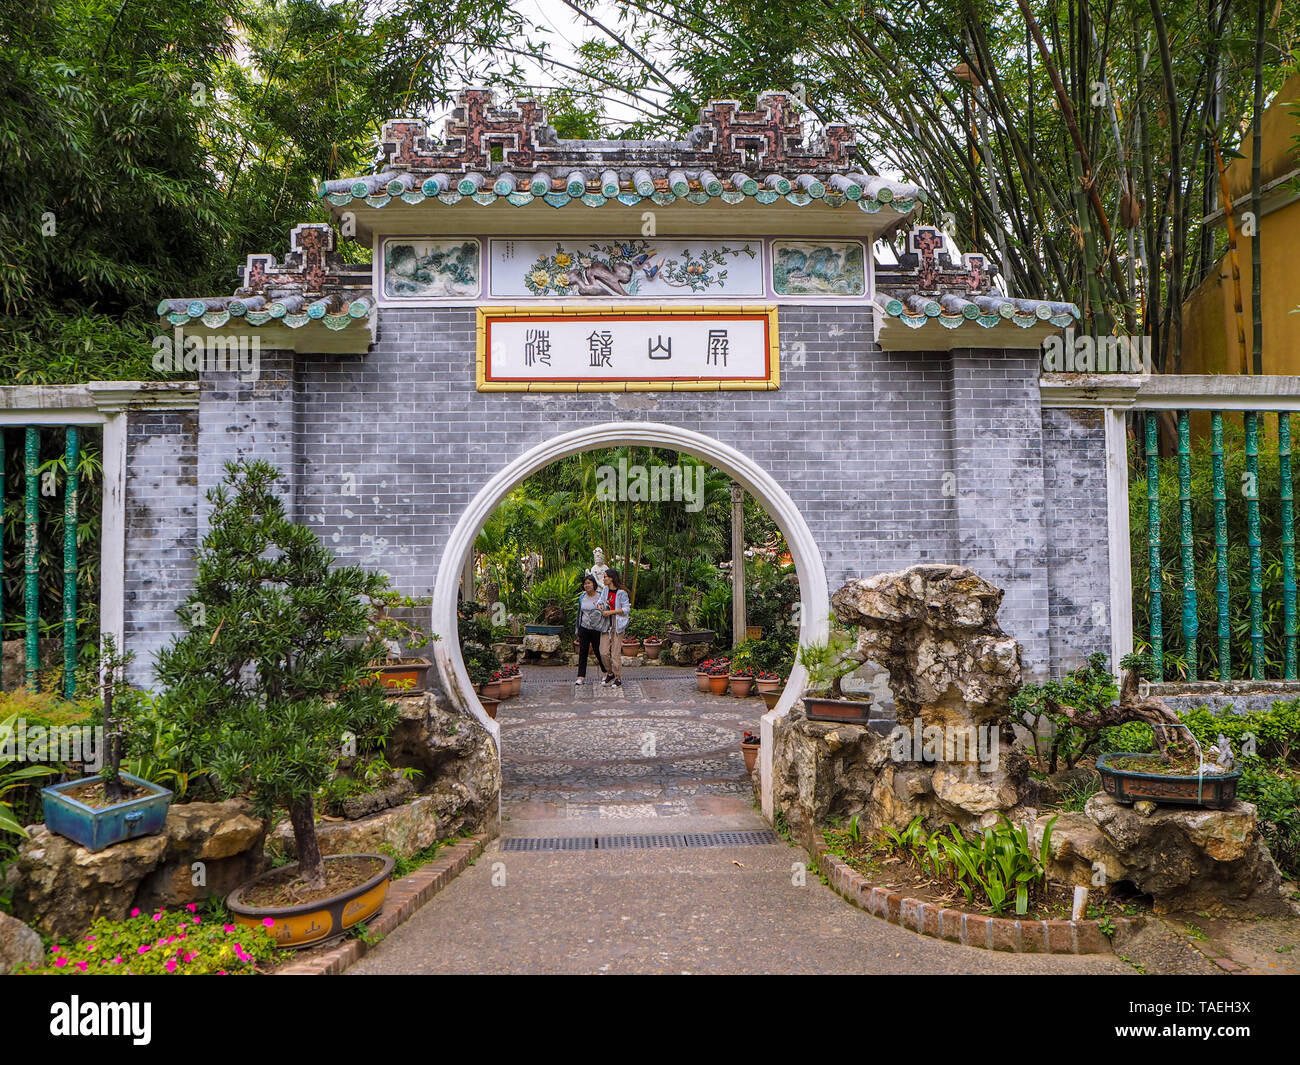 MACAU, CHINA - NOVEMBER 2018: Entrance to the Lou Lim Leoc public garden and park in the city center Stock Photo